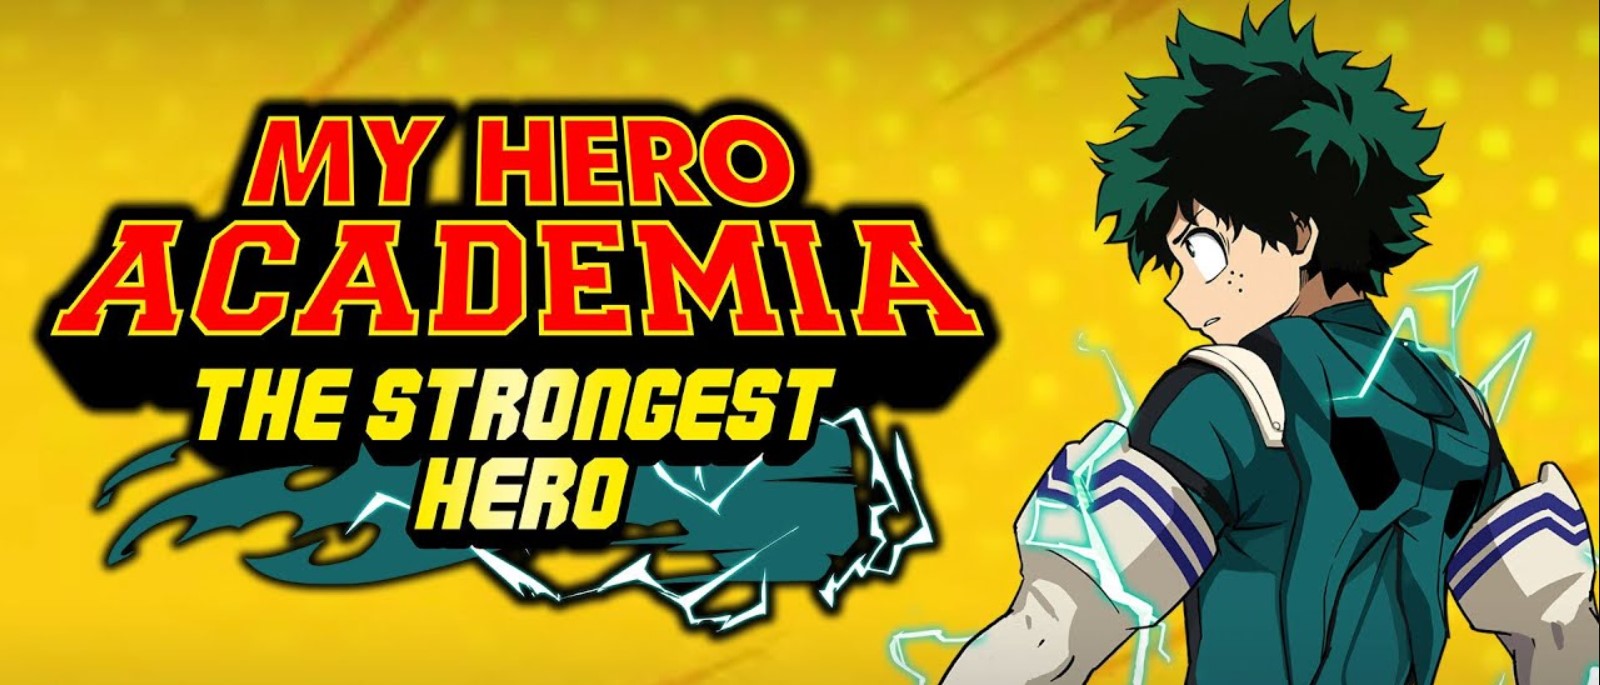 My Hero Academia The Strongest Hero Download PC Game Full Version Free Download